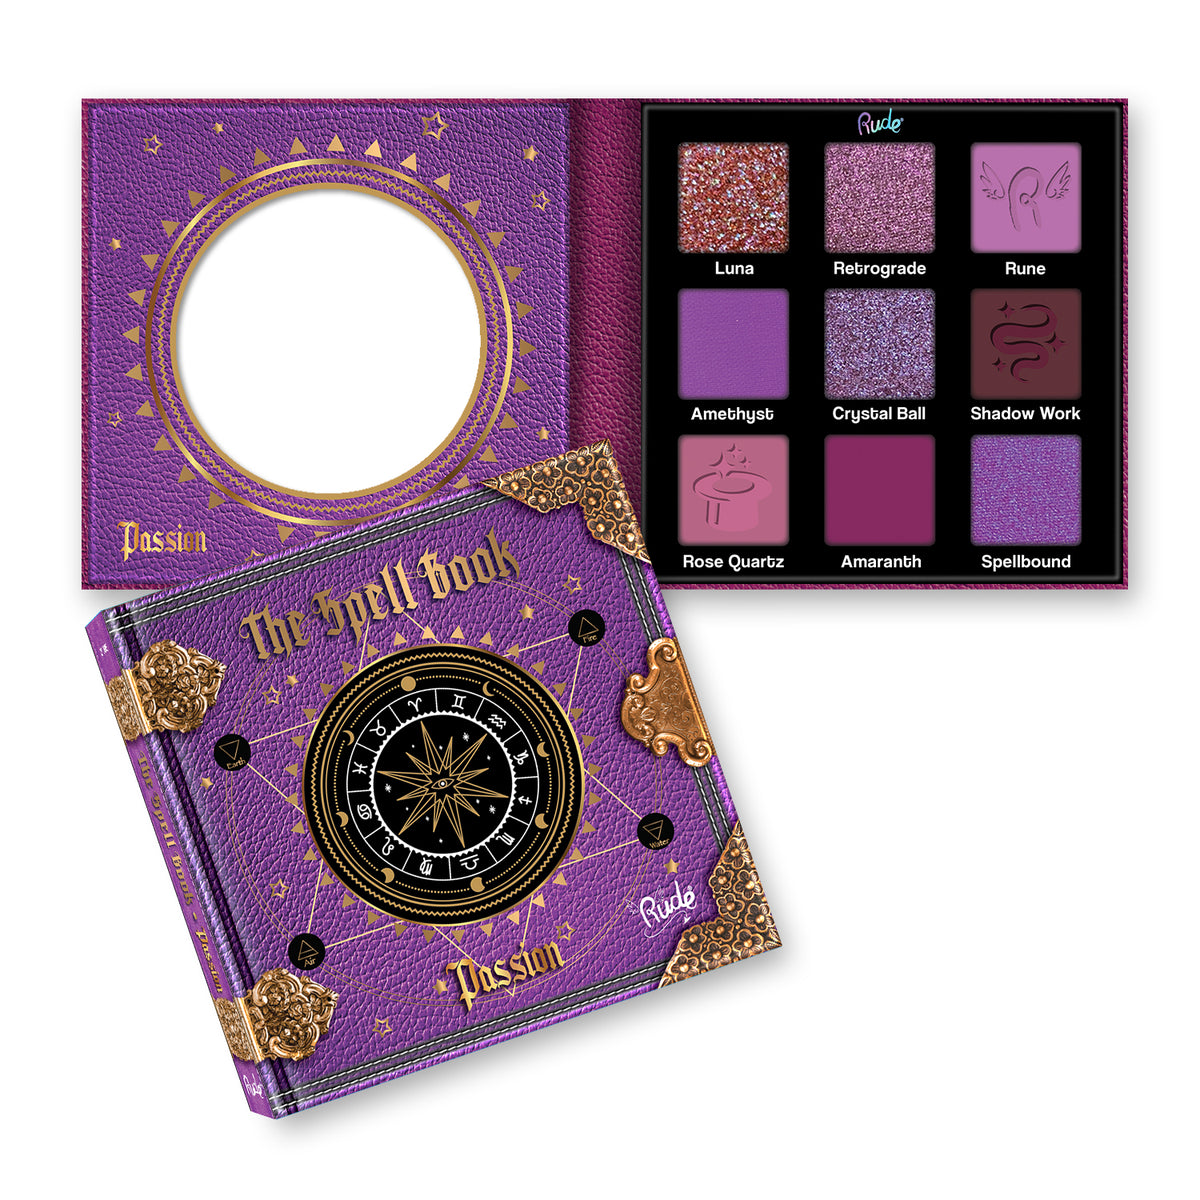 The Spell Book Palette